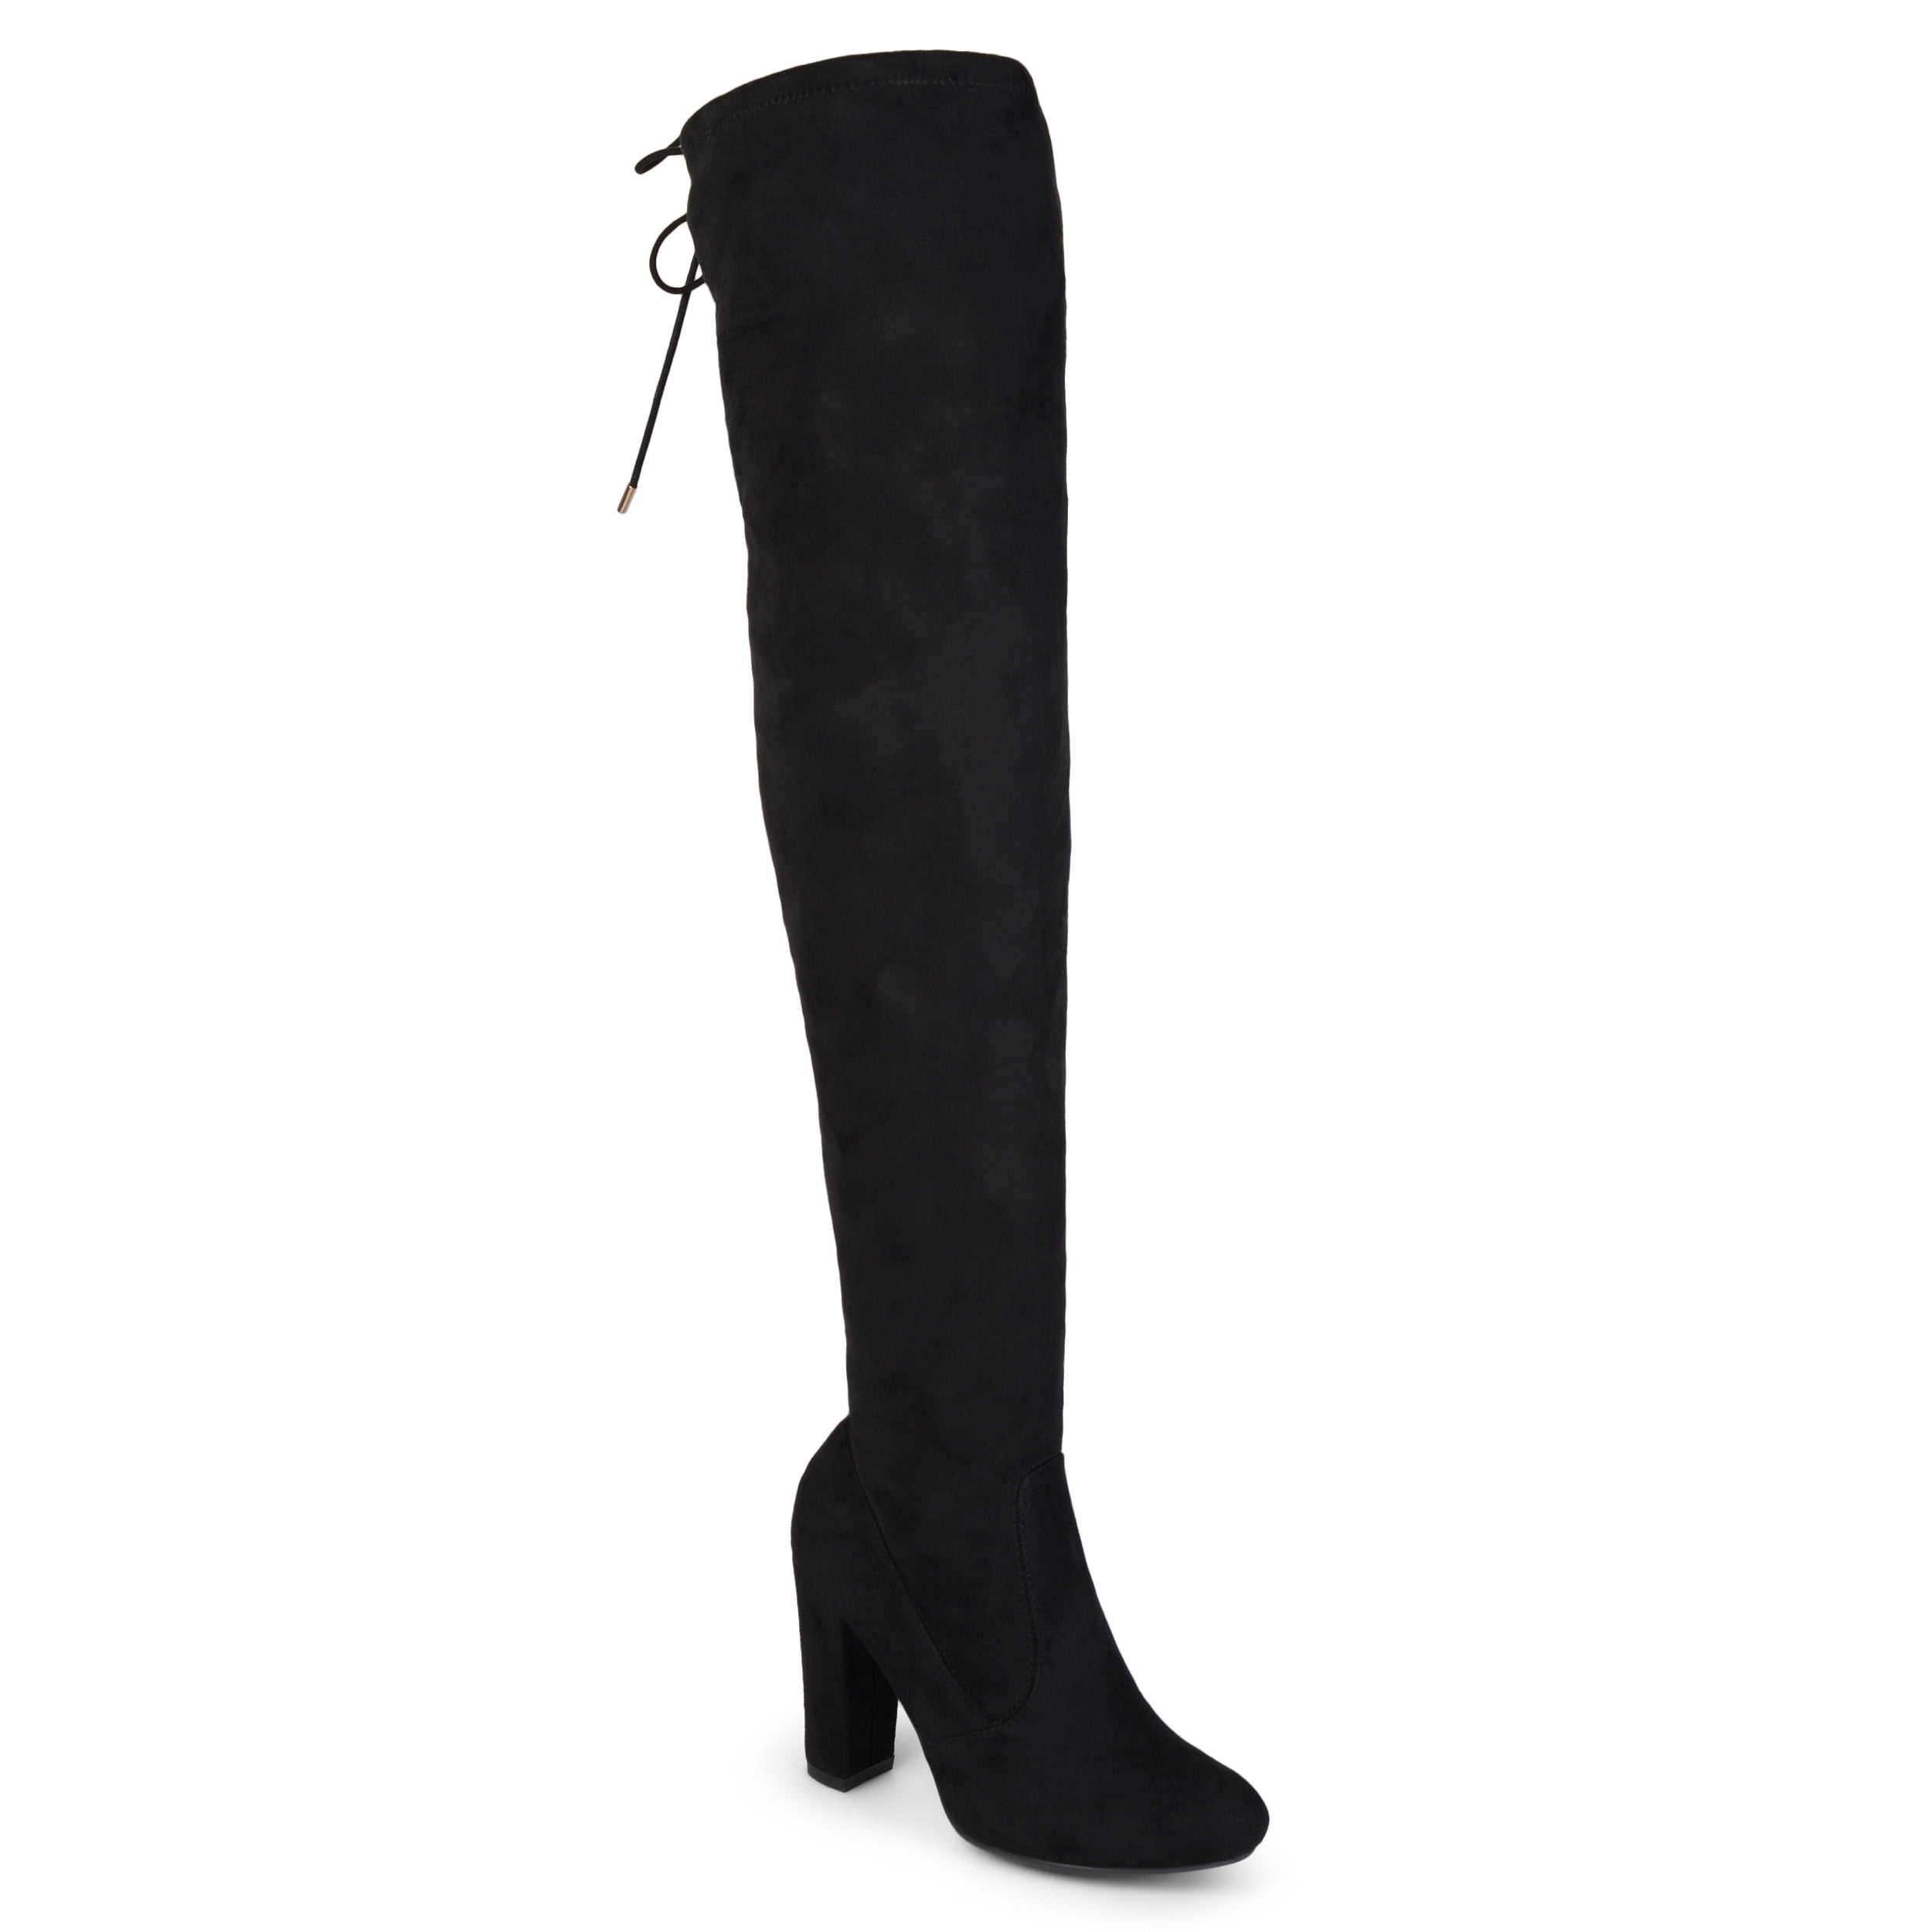 Womens Wide Black Pointed Over The Knee Boot Laces Zips High Calf Stiletto Heels 